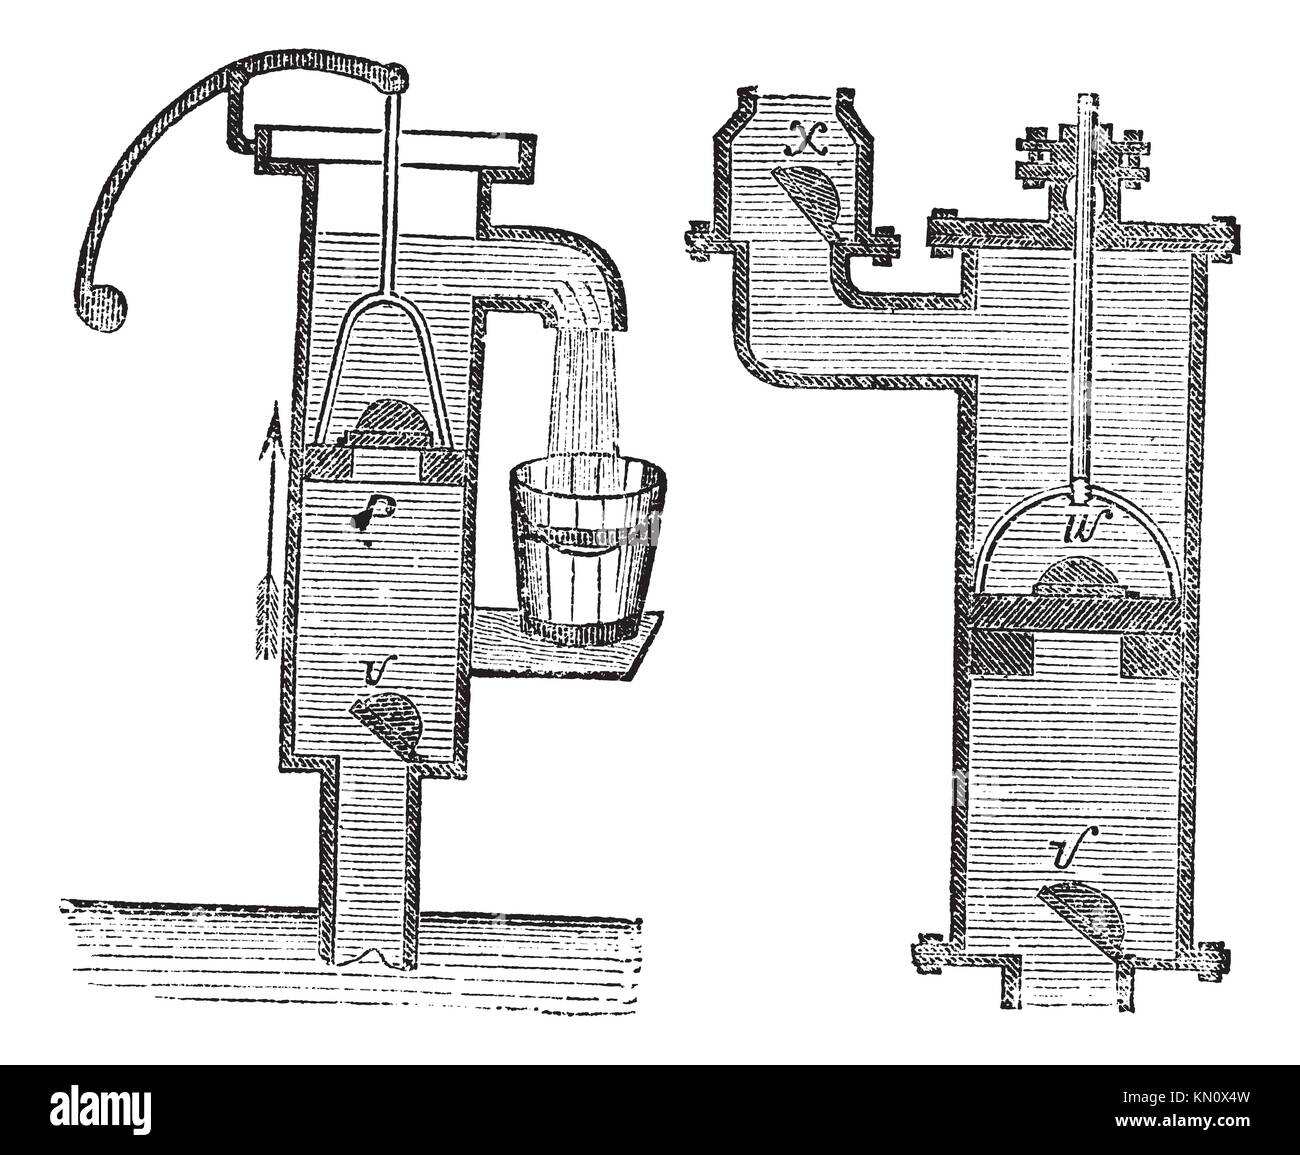 Old Water Pump Stock Illustrations  1579 Old Water Pump Stock  Illustrations Vectors  Clipart  Dreamstime